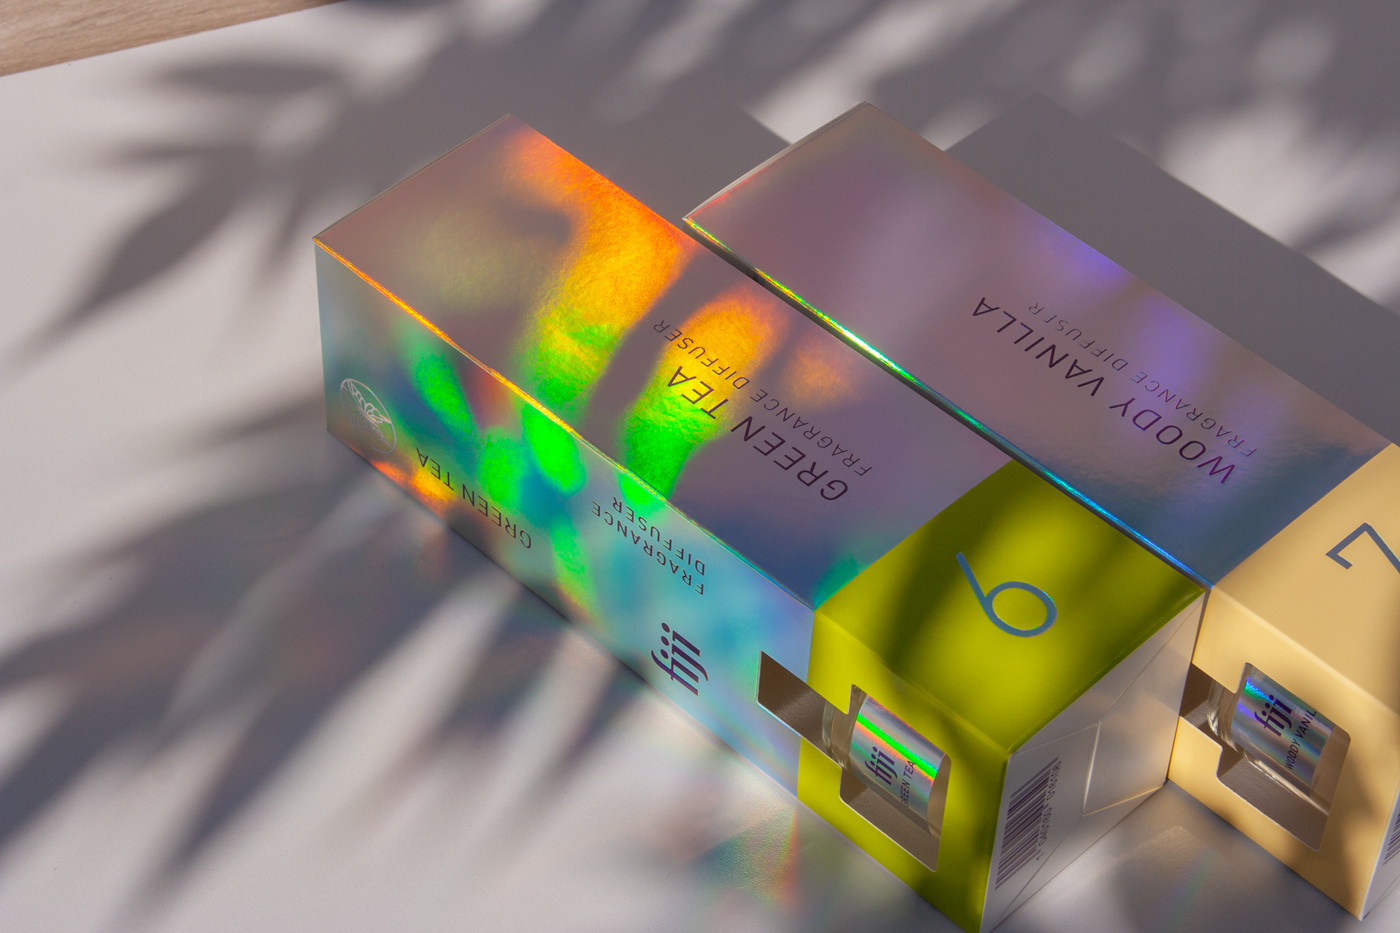 holographic foil, packaging, fragrance diffuser